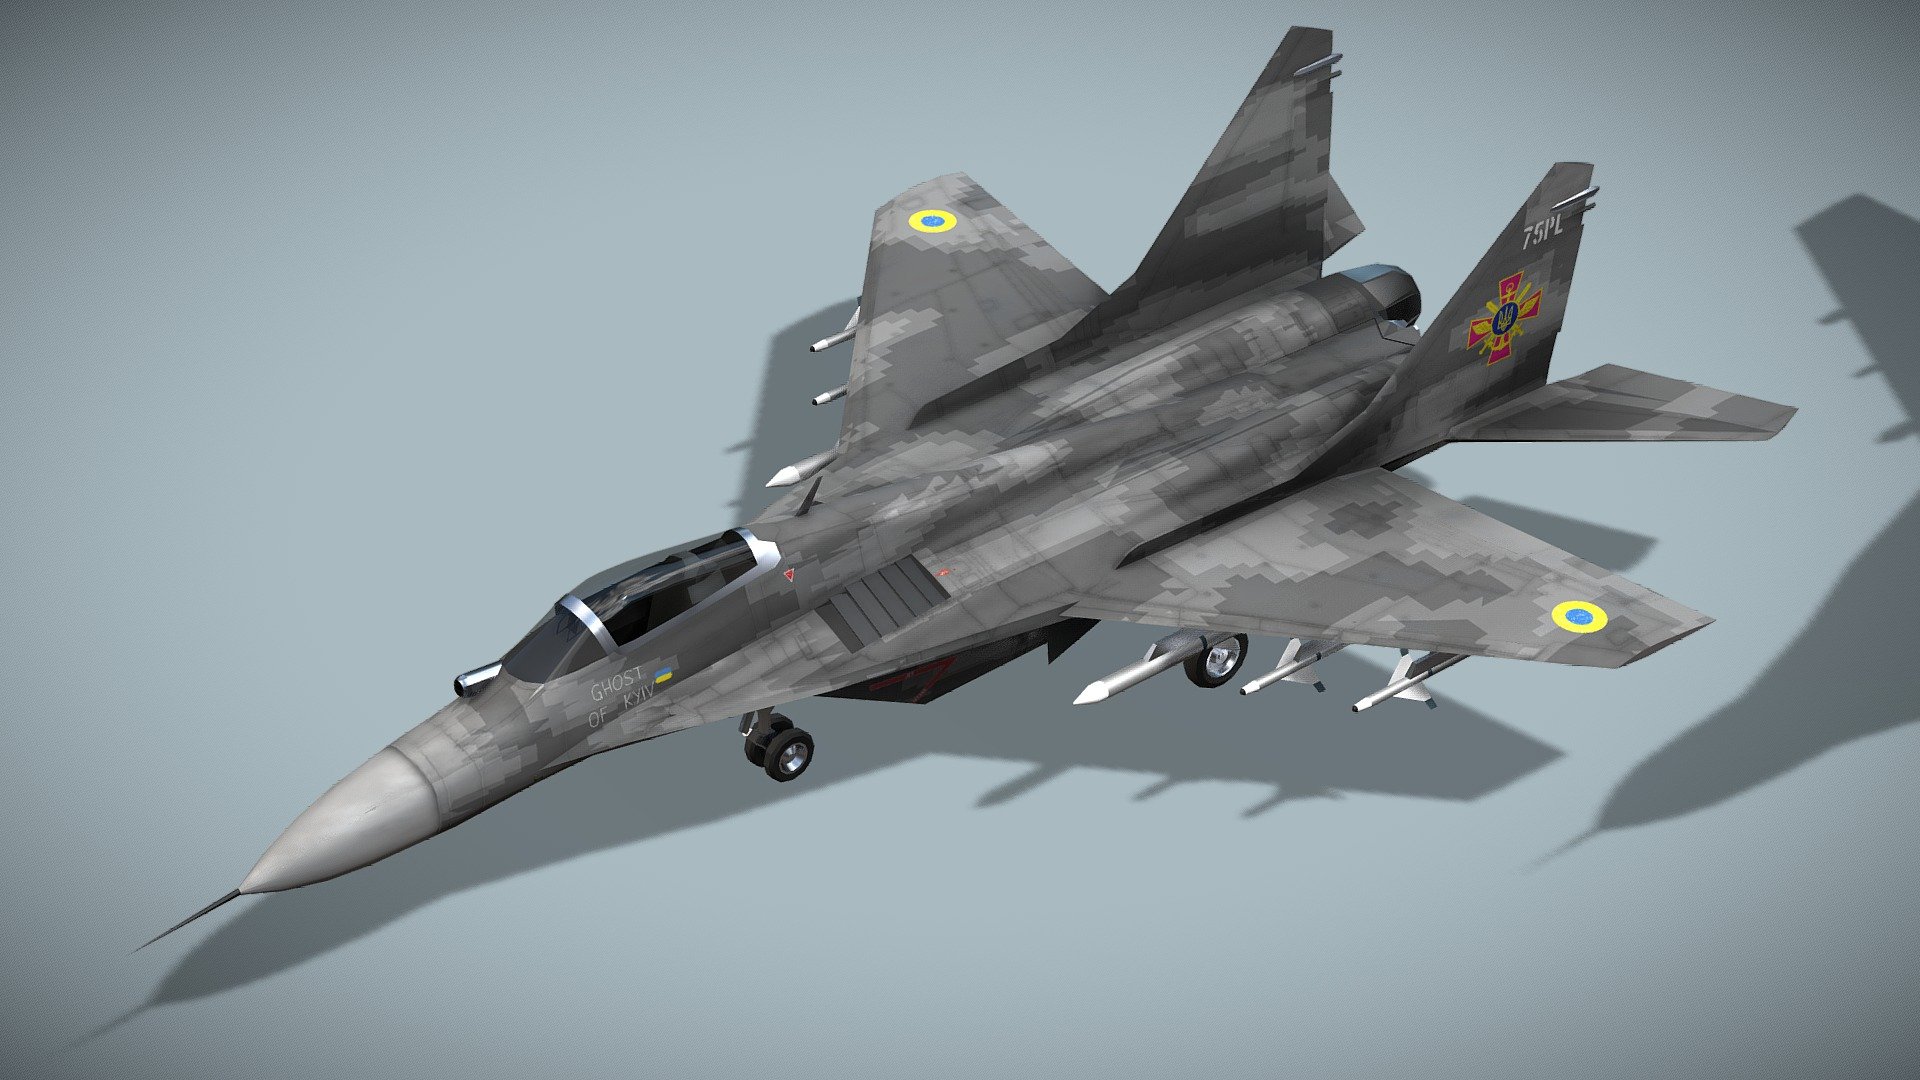 Mikoyan-Gurevich MIG-29 Fulcrum



Lowpoly model of russian supersonic jet fighter with Ukrainian and Polish colors



The Mikoyan MiG-29 is a twin-engine jet fighter aircraft designed in the Soviet Union. Developed by the Mikoyan design bureau as an air superiority fighter during the 1970s, the MiG-29, along with the larger Sukhoi Su-27, was developed to counter new U.S. fighters such as the McDonnell Douglas F-15 Eagle and the General Dynamics F-16 Fighting Falcon. The MiG-29 entered service with the Soviet Air Forces in 1982.



Standing version and flying with separate color schemes

Fully rigged

Model has bump map, roughness map and 2 x diffuse textures

Incl. 3D print STL file



Check also my aircrafts and cars

Patreon with monthly free model - MIG-29 Fulcrum - Ghost of Kyiv - Buy Royalty Free 3D model by NETRUNNER_pl 3d model